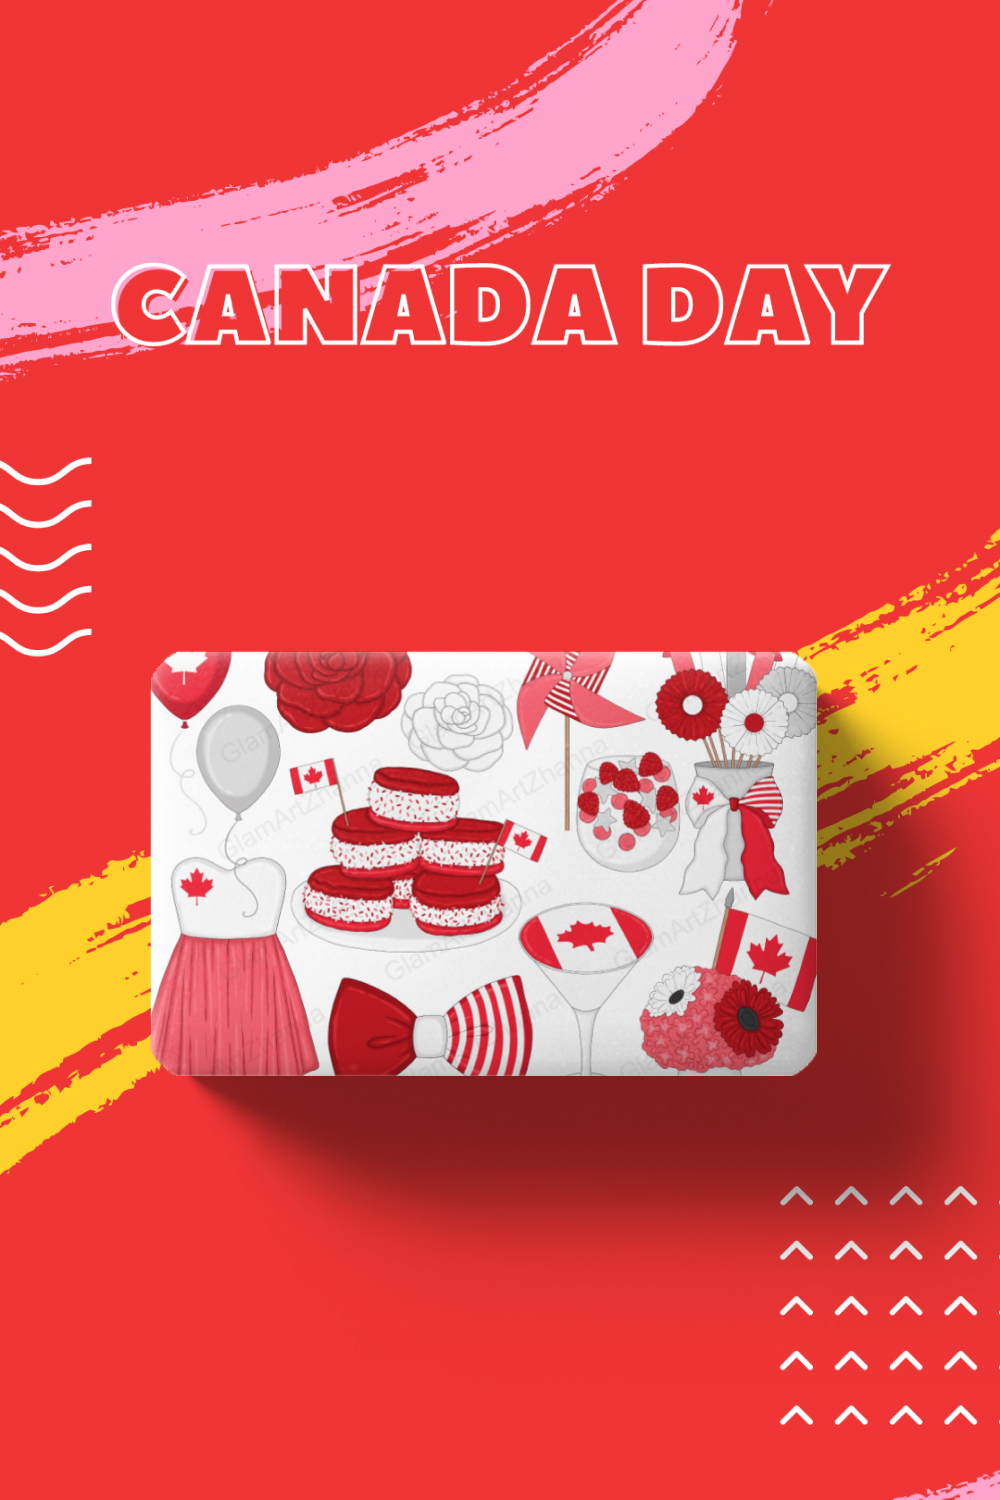 Pinterest of canada day clipart.